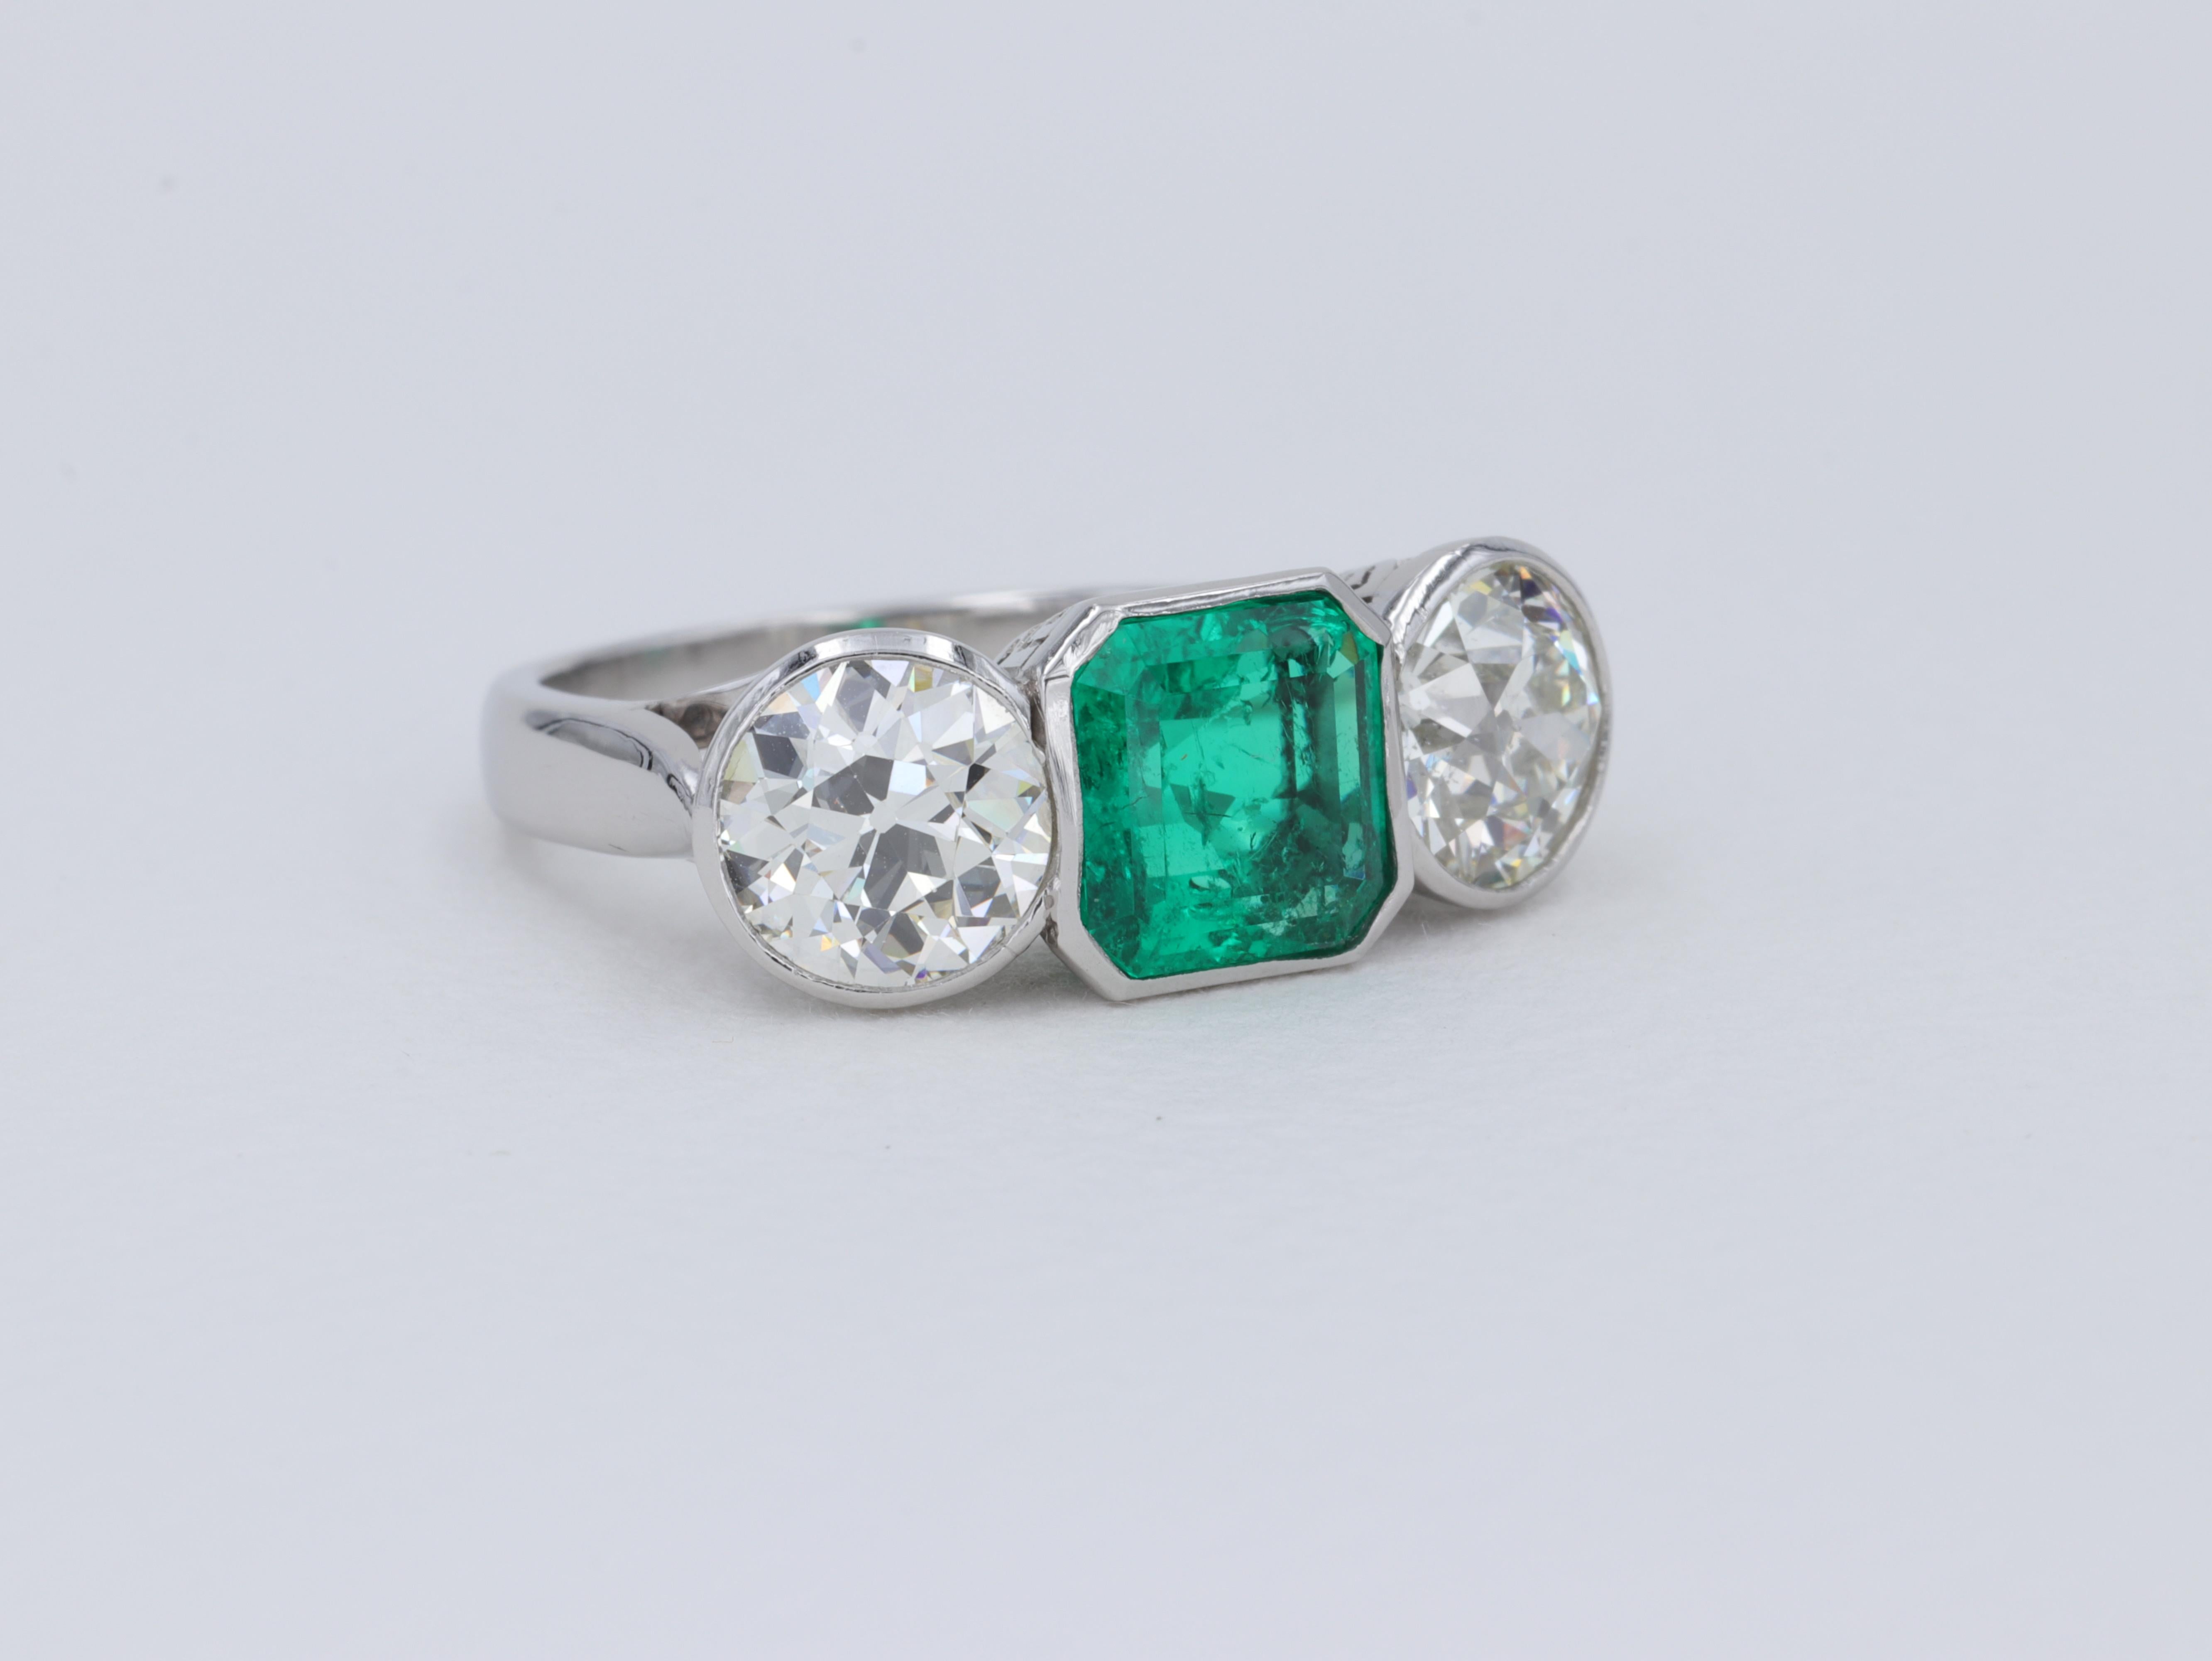 This magnificent art deco three stone ring hand crafted in platinum features a beautiful 2.14 carat Colombian emerald of top color with insignificant to minor traditional oil present as noted by its accompanying AGL report. The emerald is flanked by